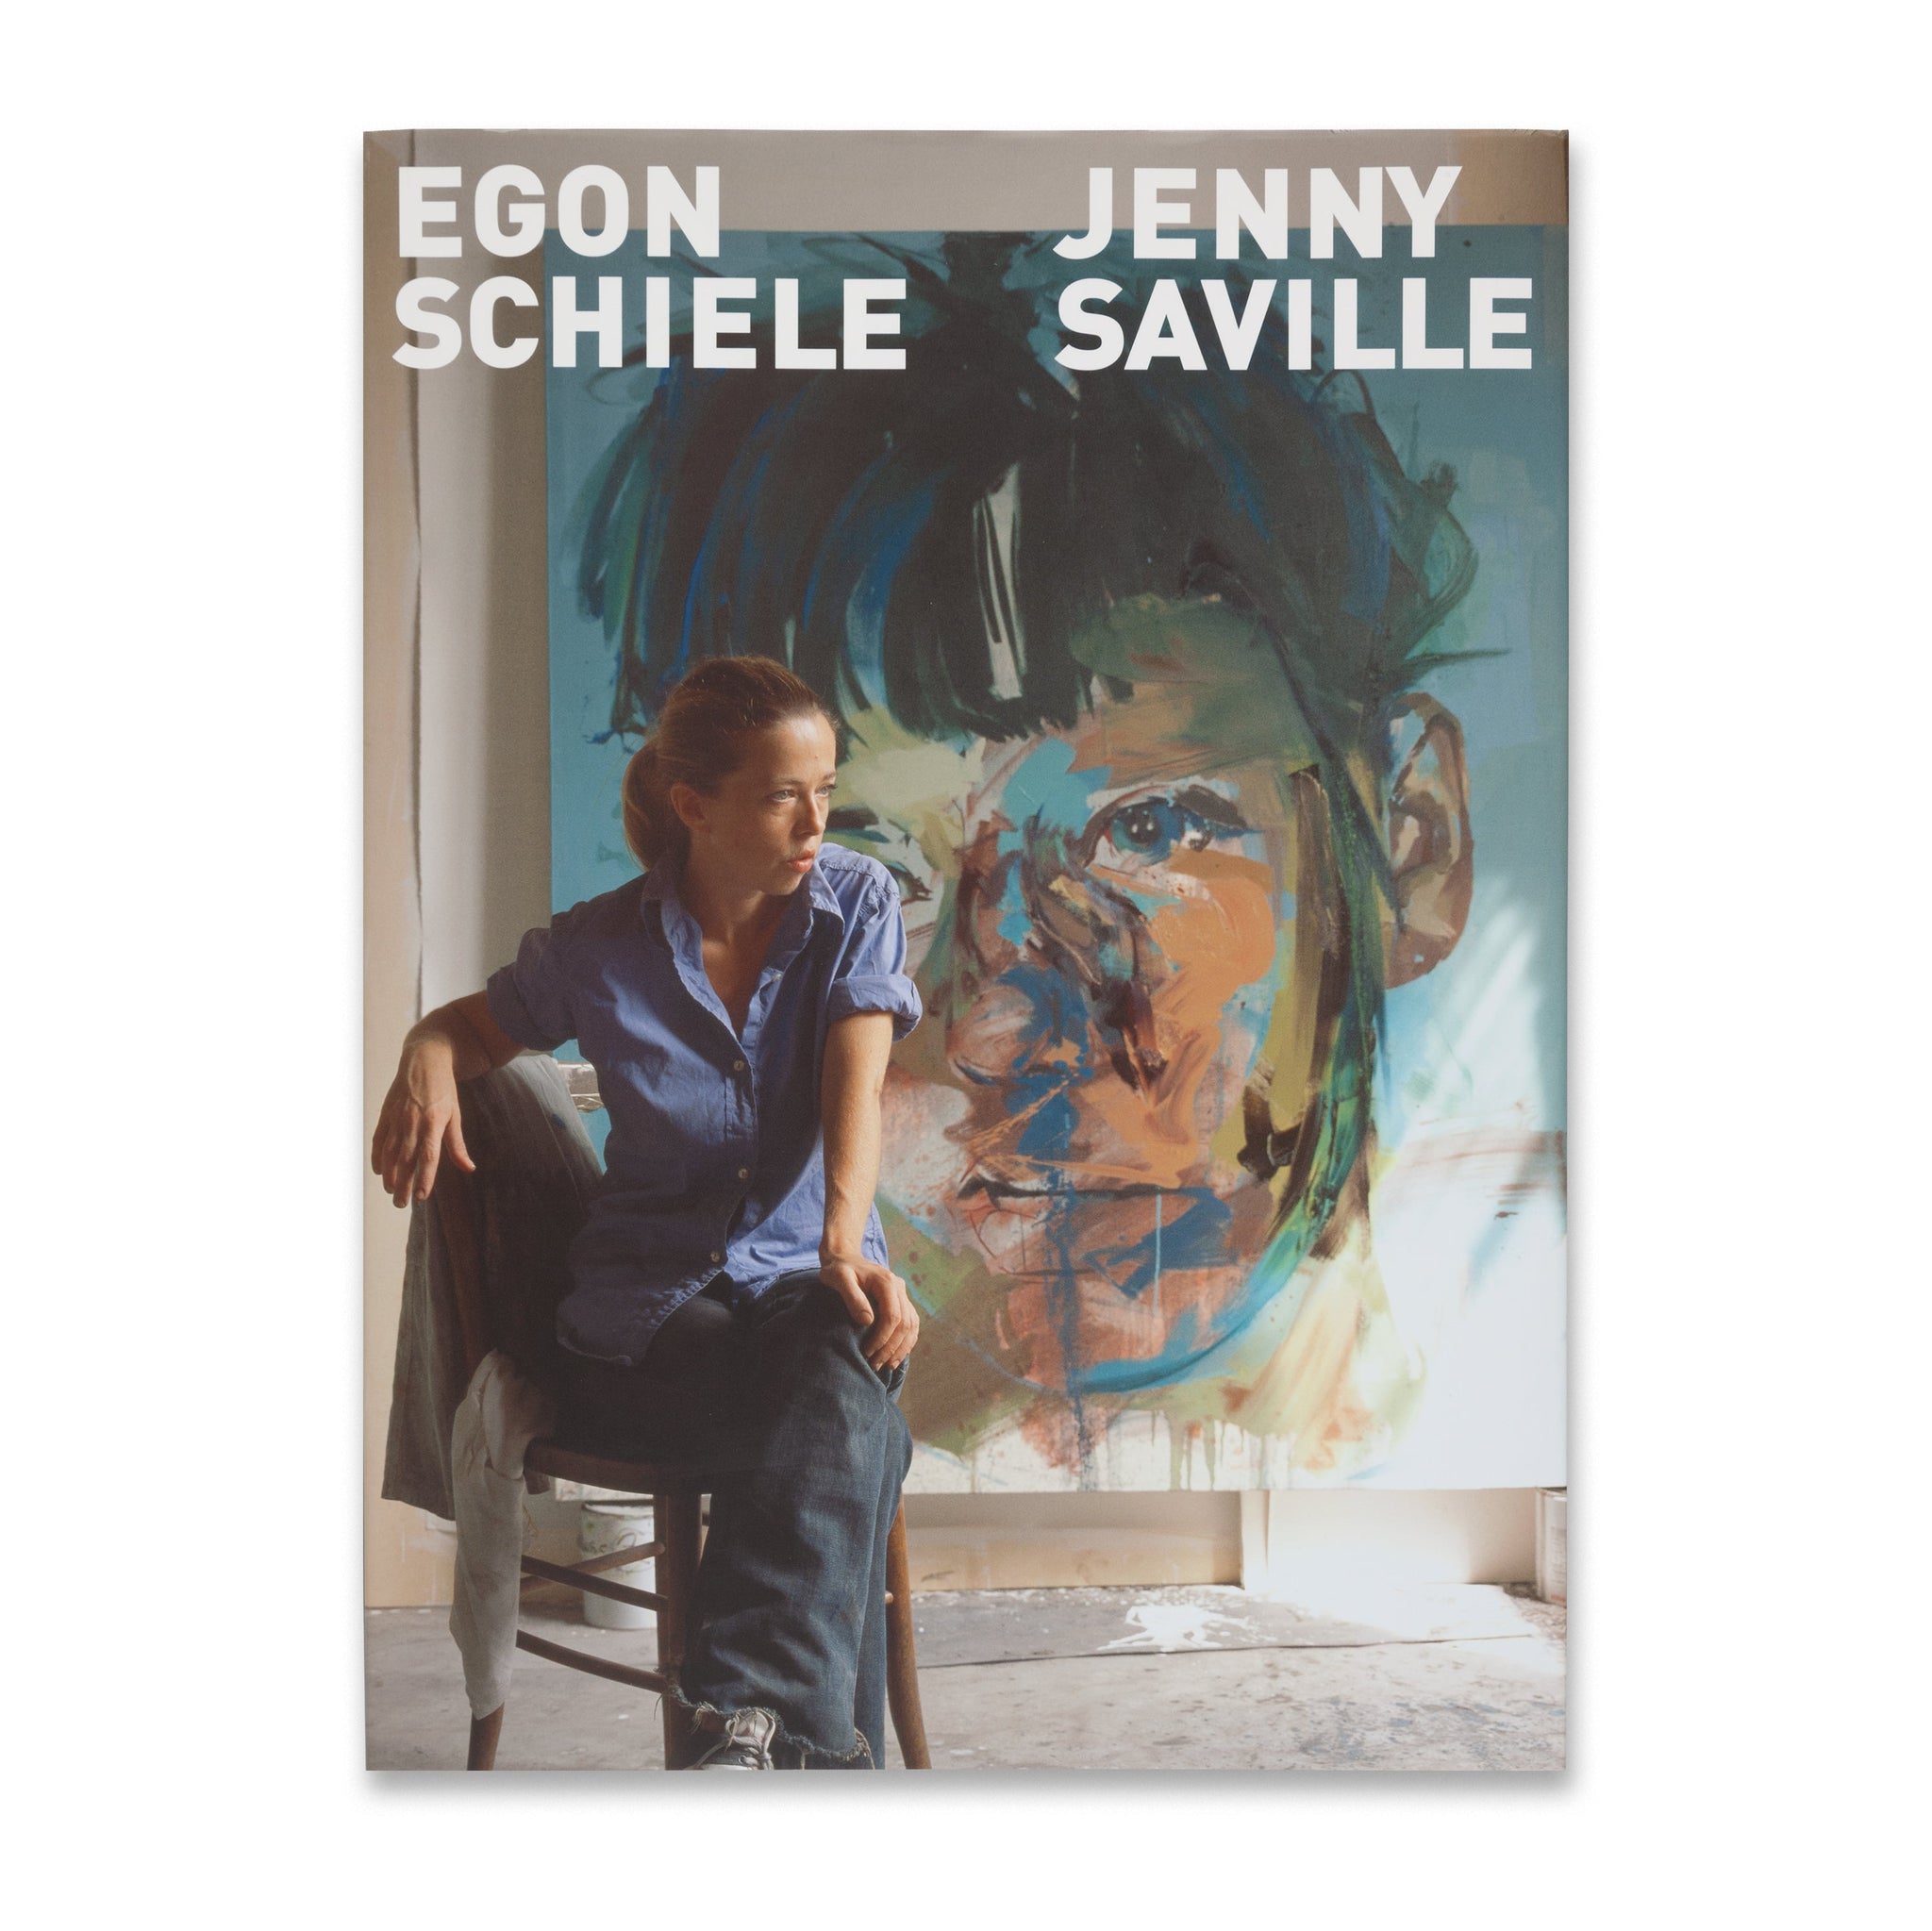 Cover of the book Egon Schiele—Jenny Saville with dust jacket